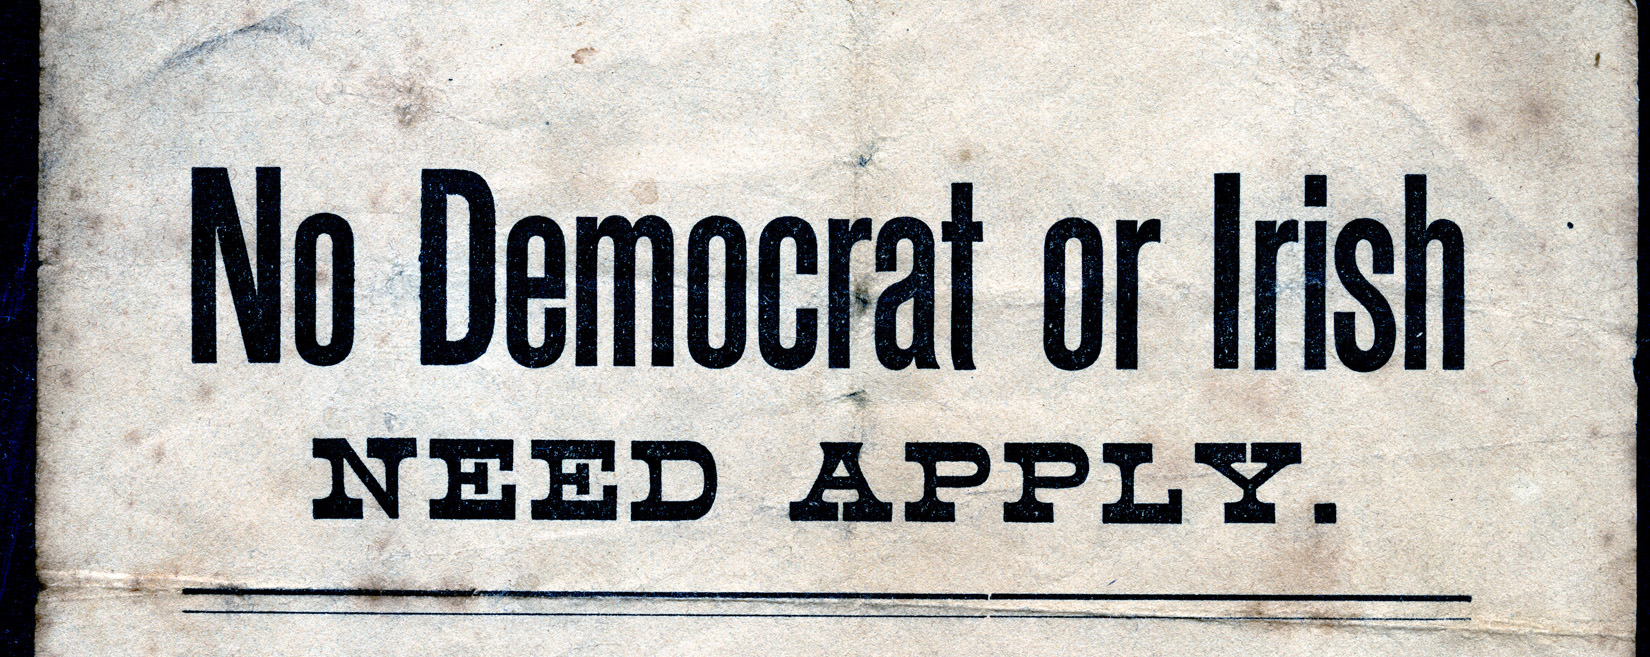 A flier with black ink printed on aged, wrinkled paper. The flier reads in dark bold letters "No Democrat or Irish NEED APPLY."